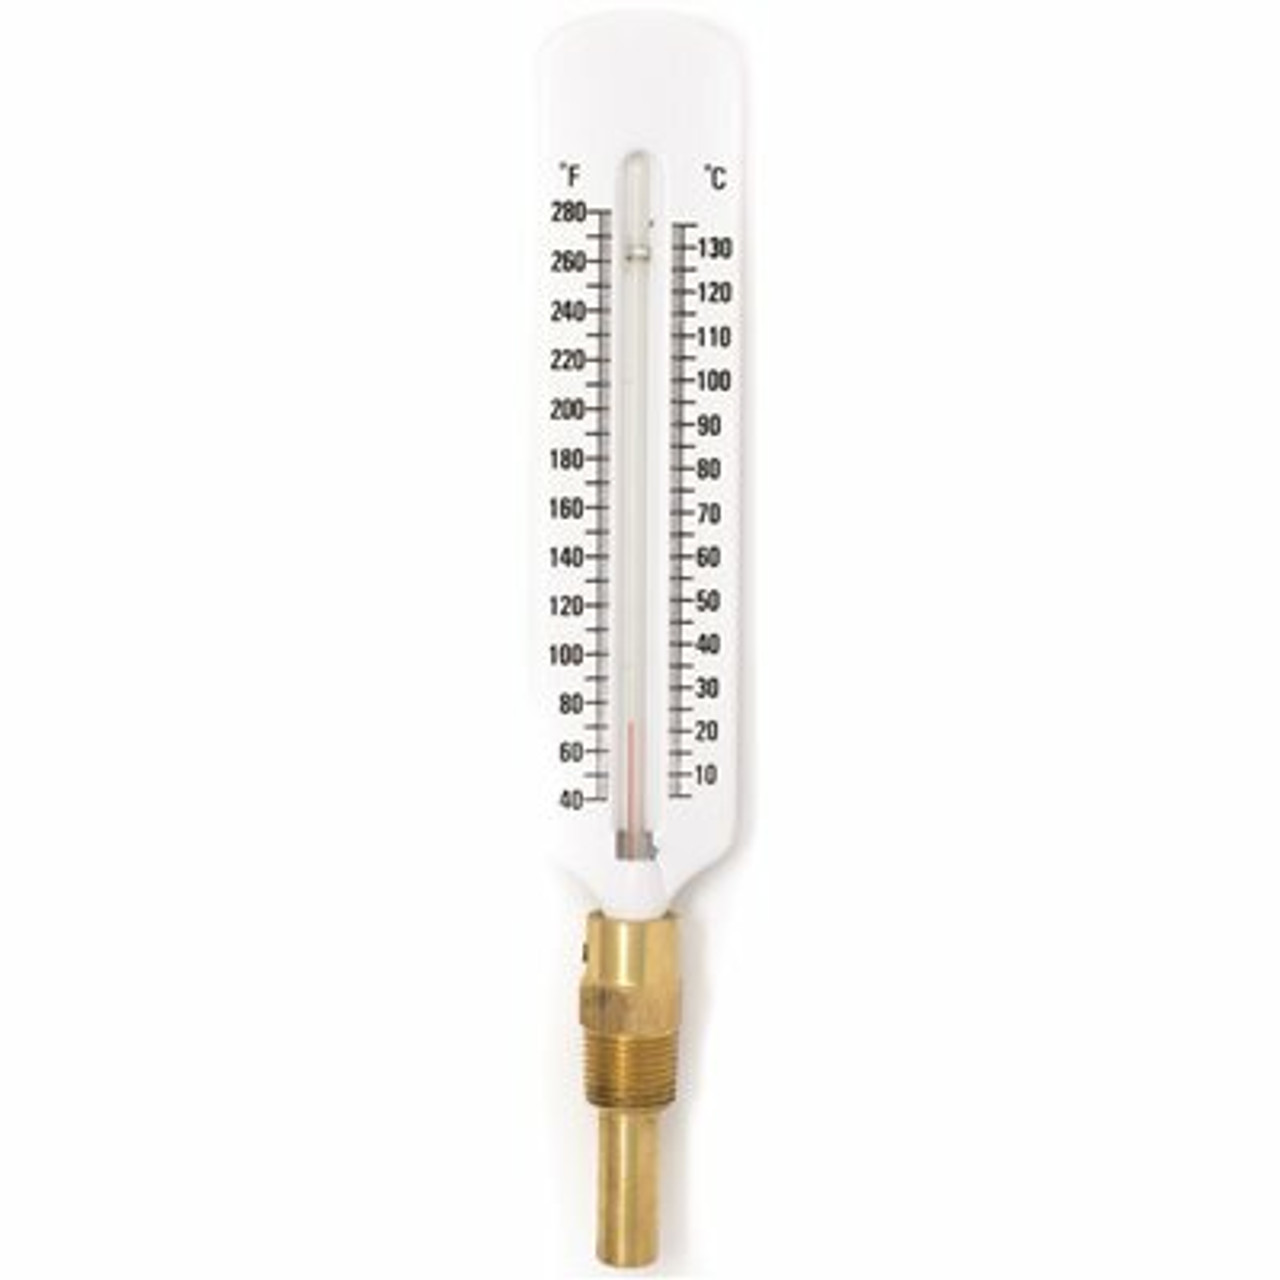 5 In. Scale Thermometer 40/280 Degree Fahrenhuit With Brass Well For Hvac Utility Accessory